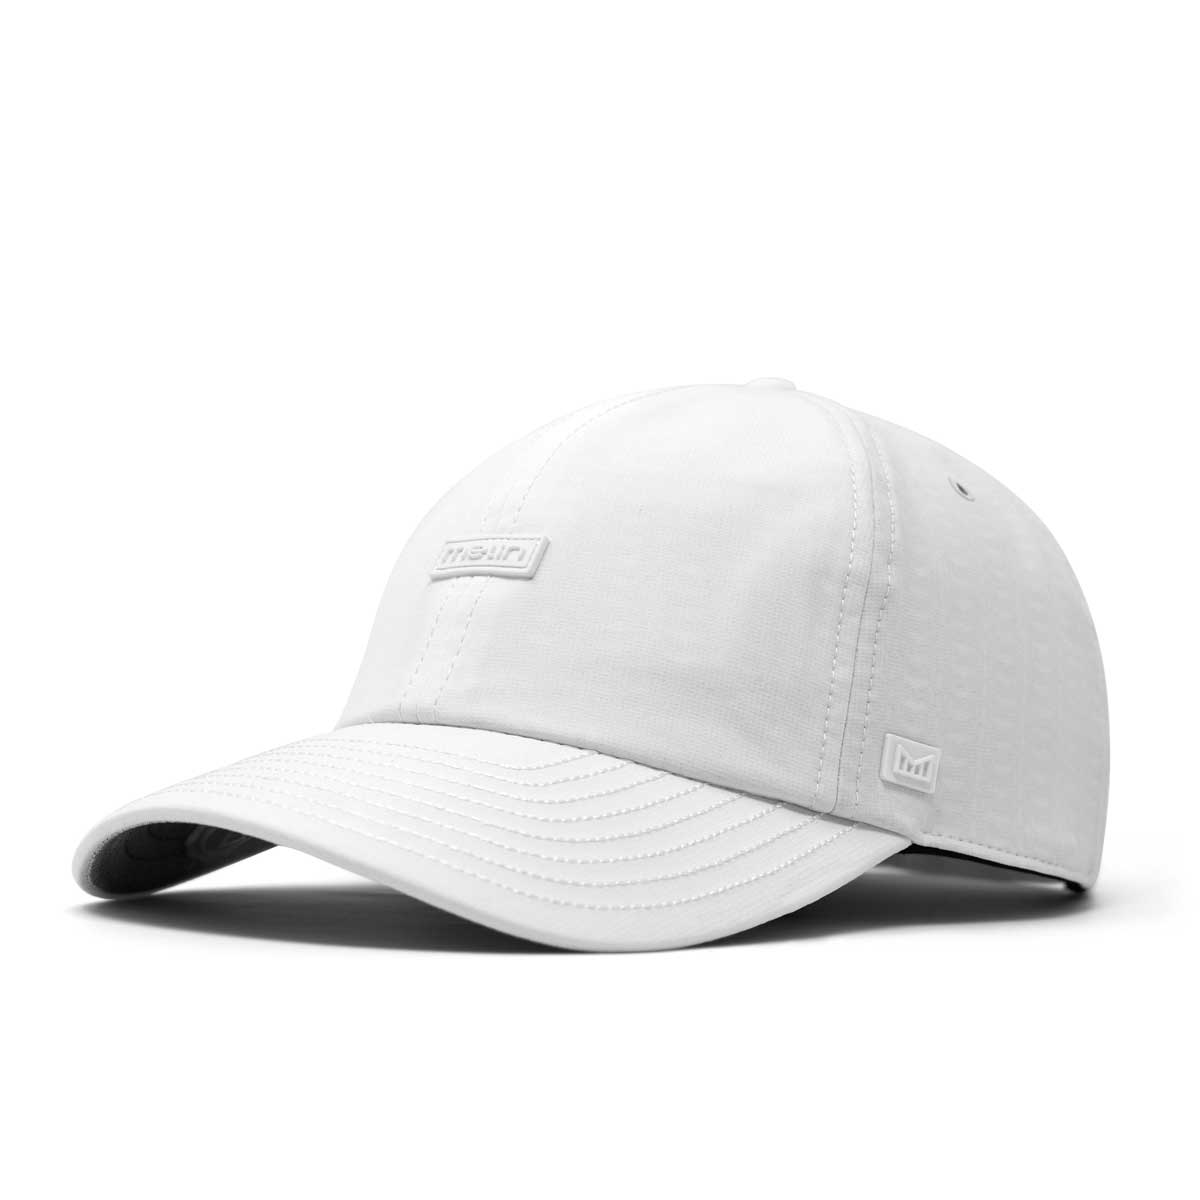 Melin: The Legend Hydro Hat - WHITE